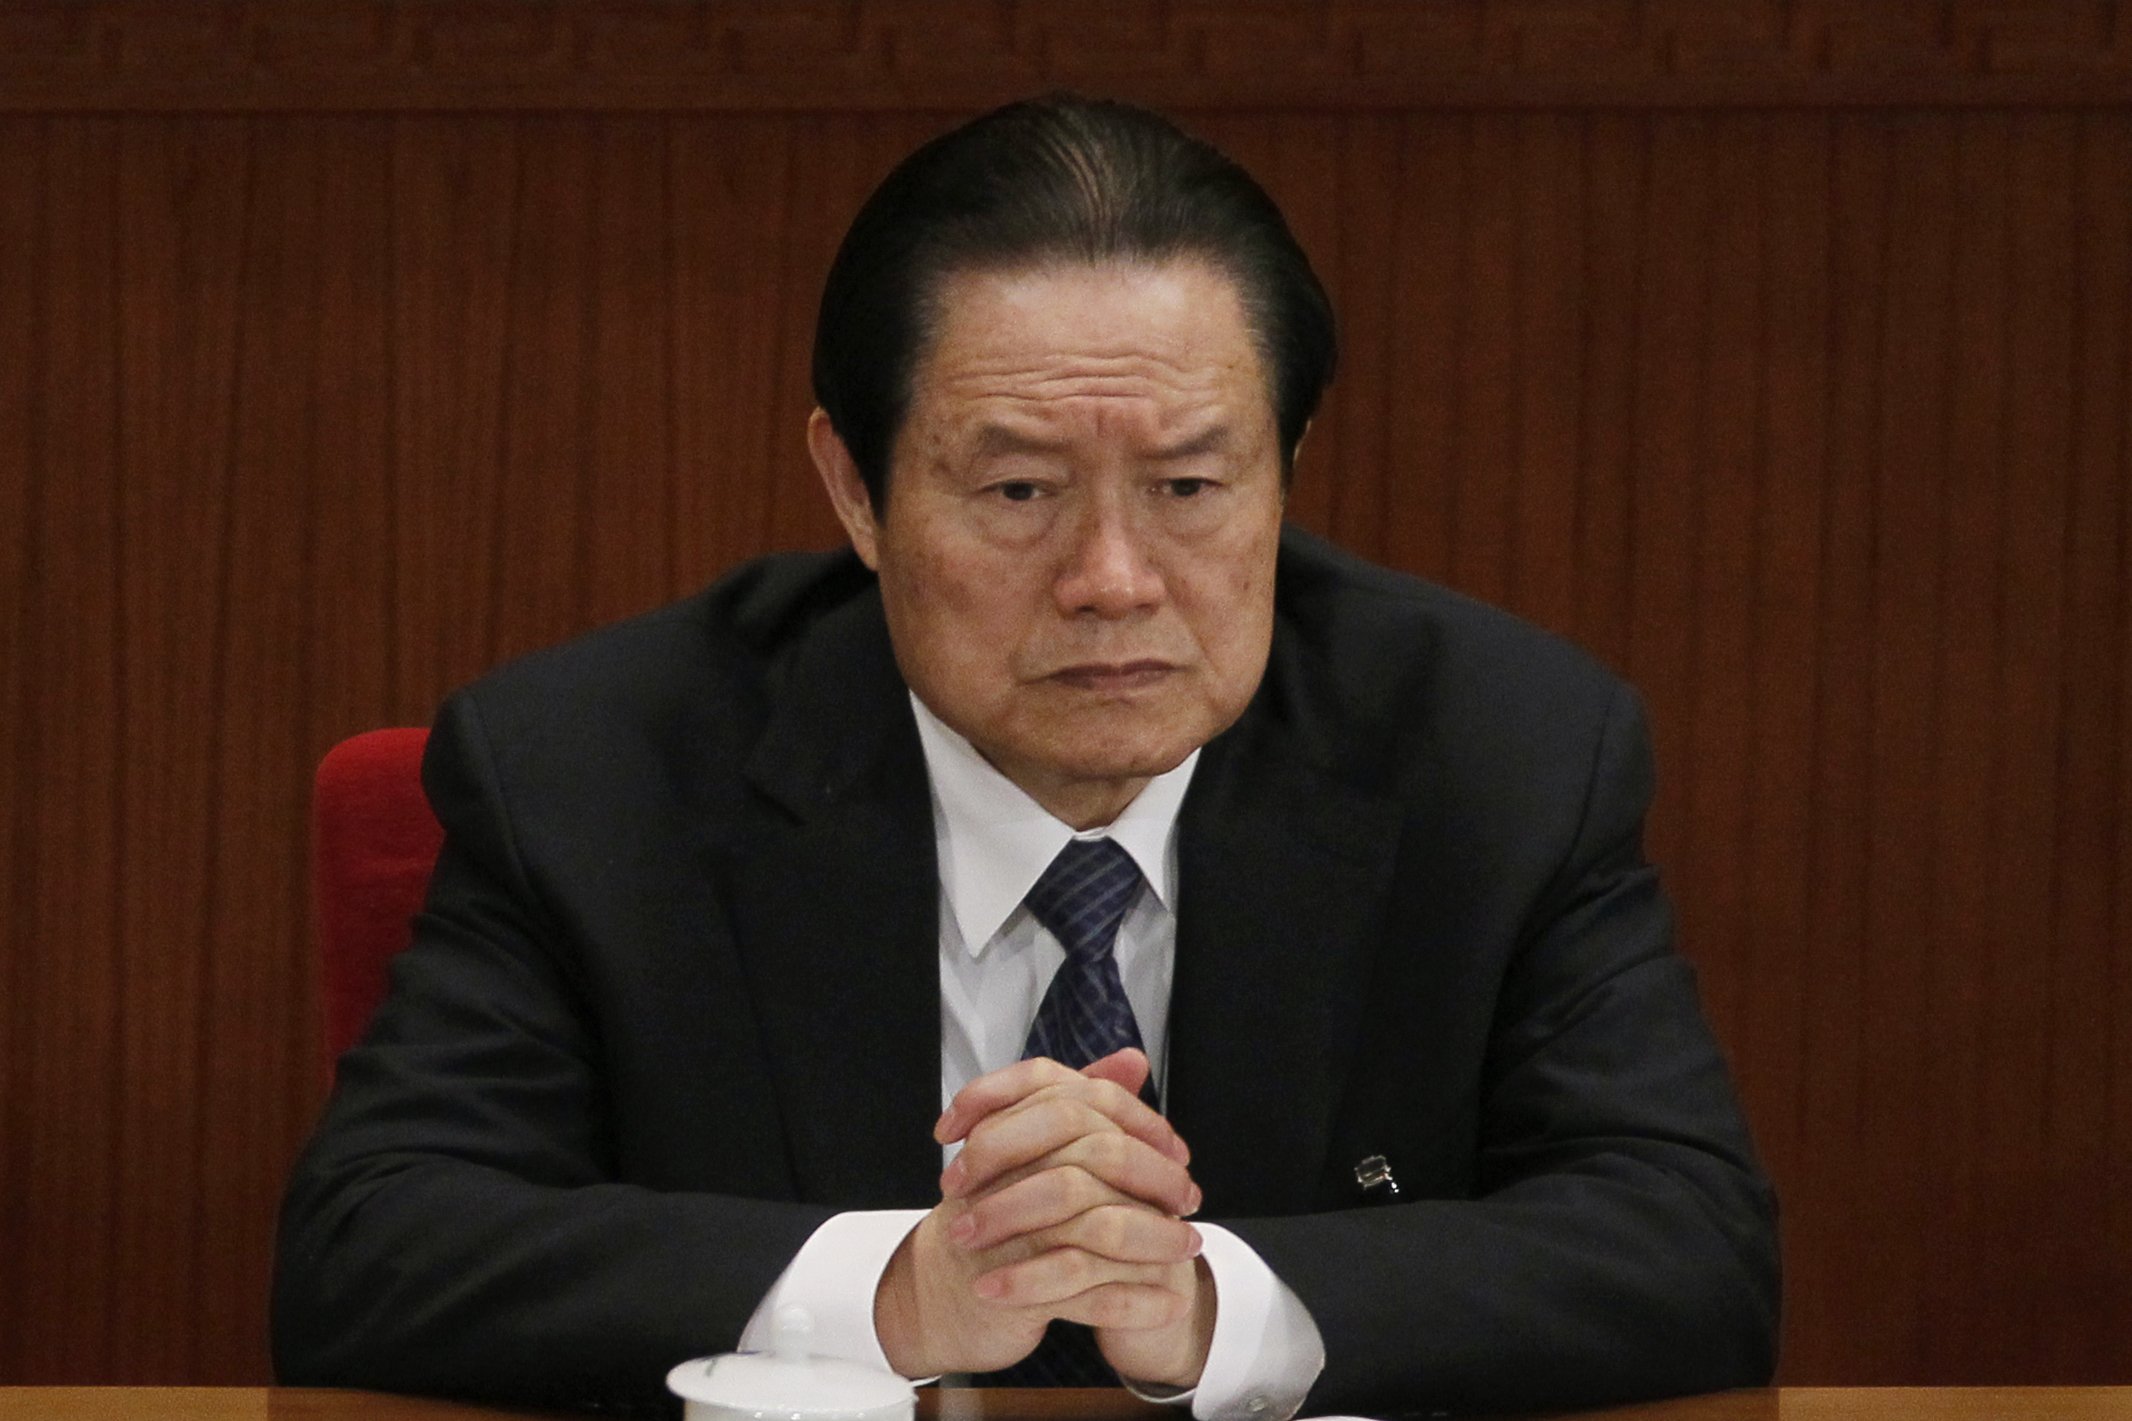 Zhou Yongkang, then Chinese Communist Party Politburo Standing Committee member in charge of security, attends a plenary session of the National People's Congress at the Great Hall of the People in Beijing on March 9, 2012.